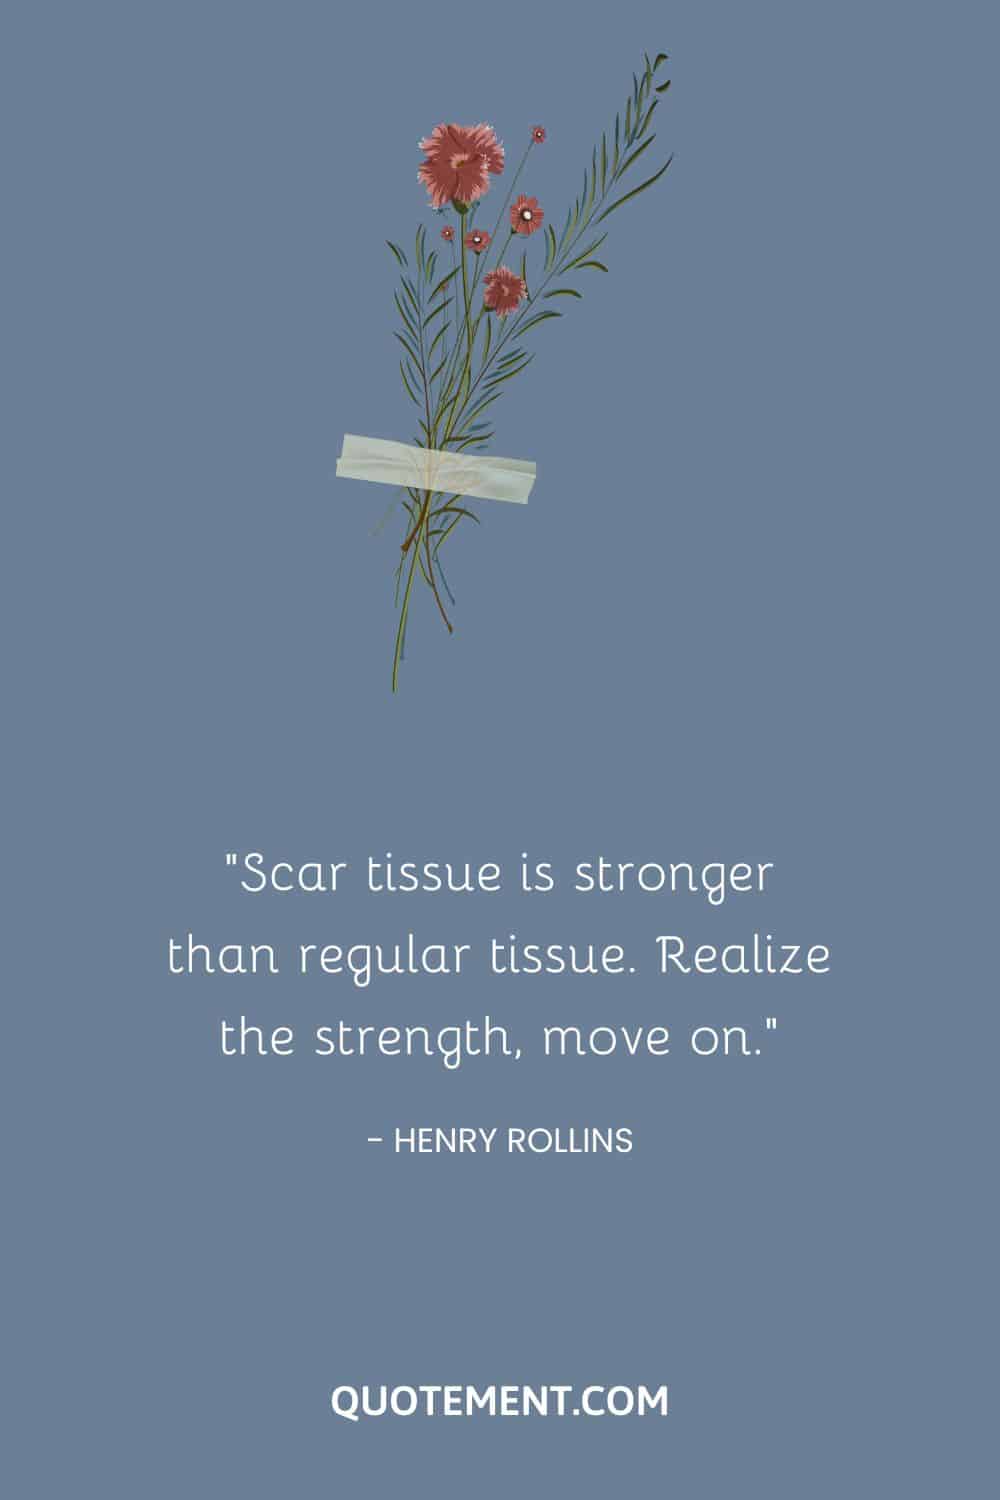 Scar tissue is stronger than regular tissue. Realize the strength, move on